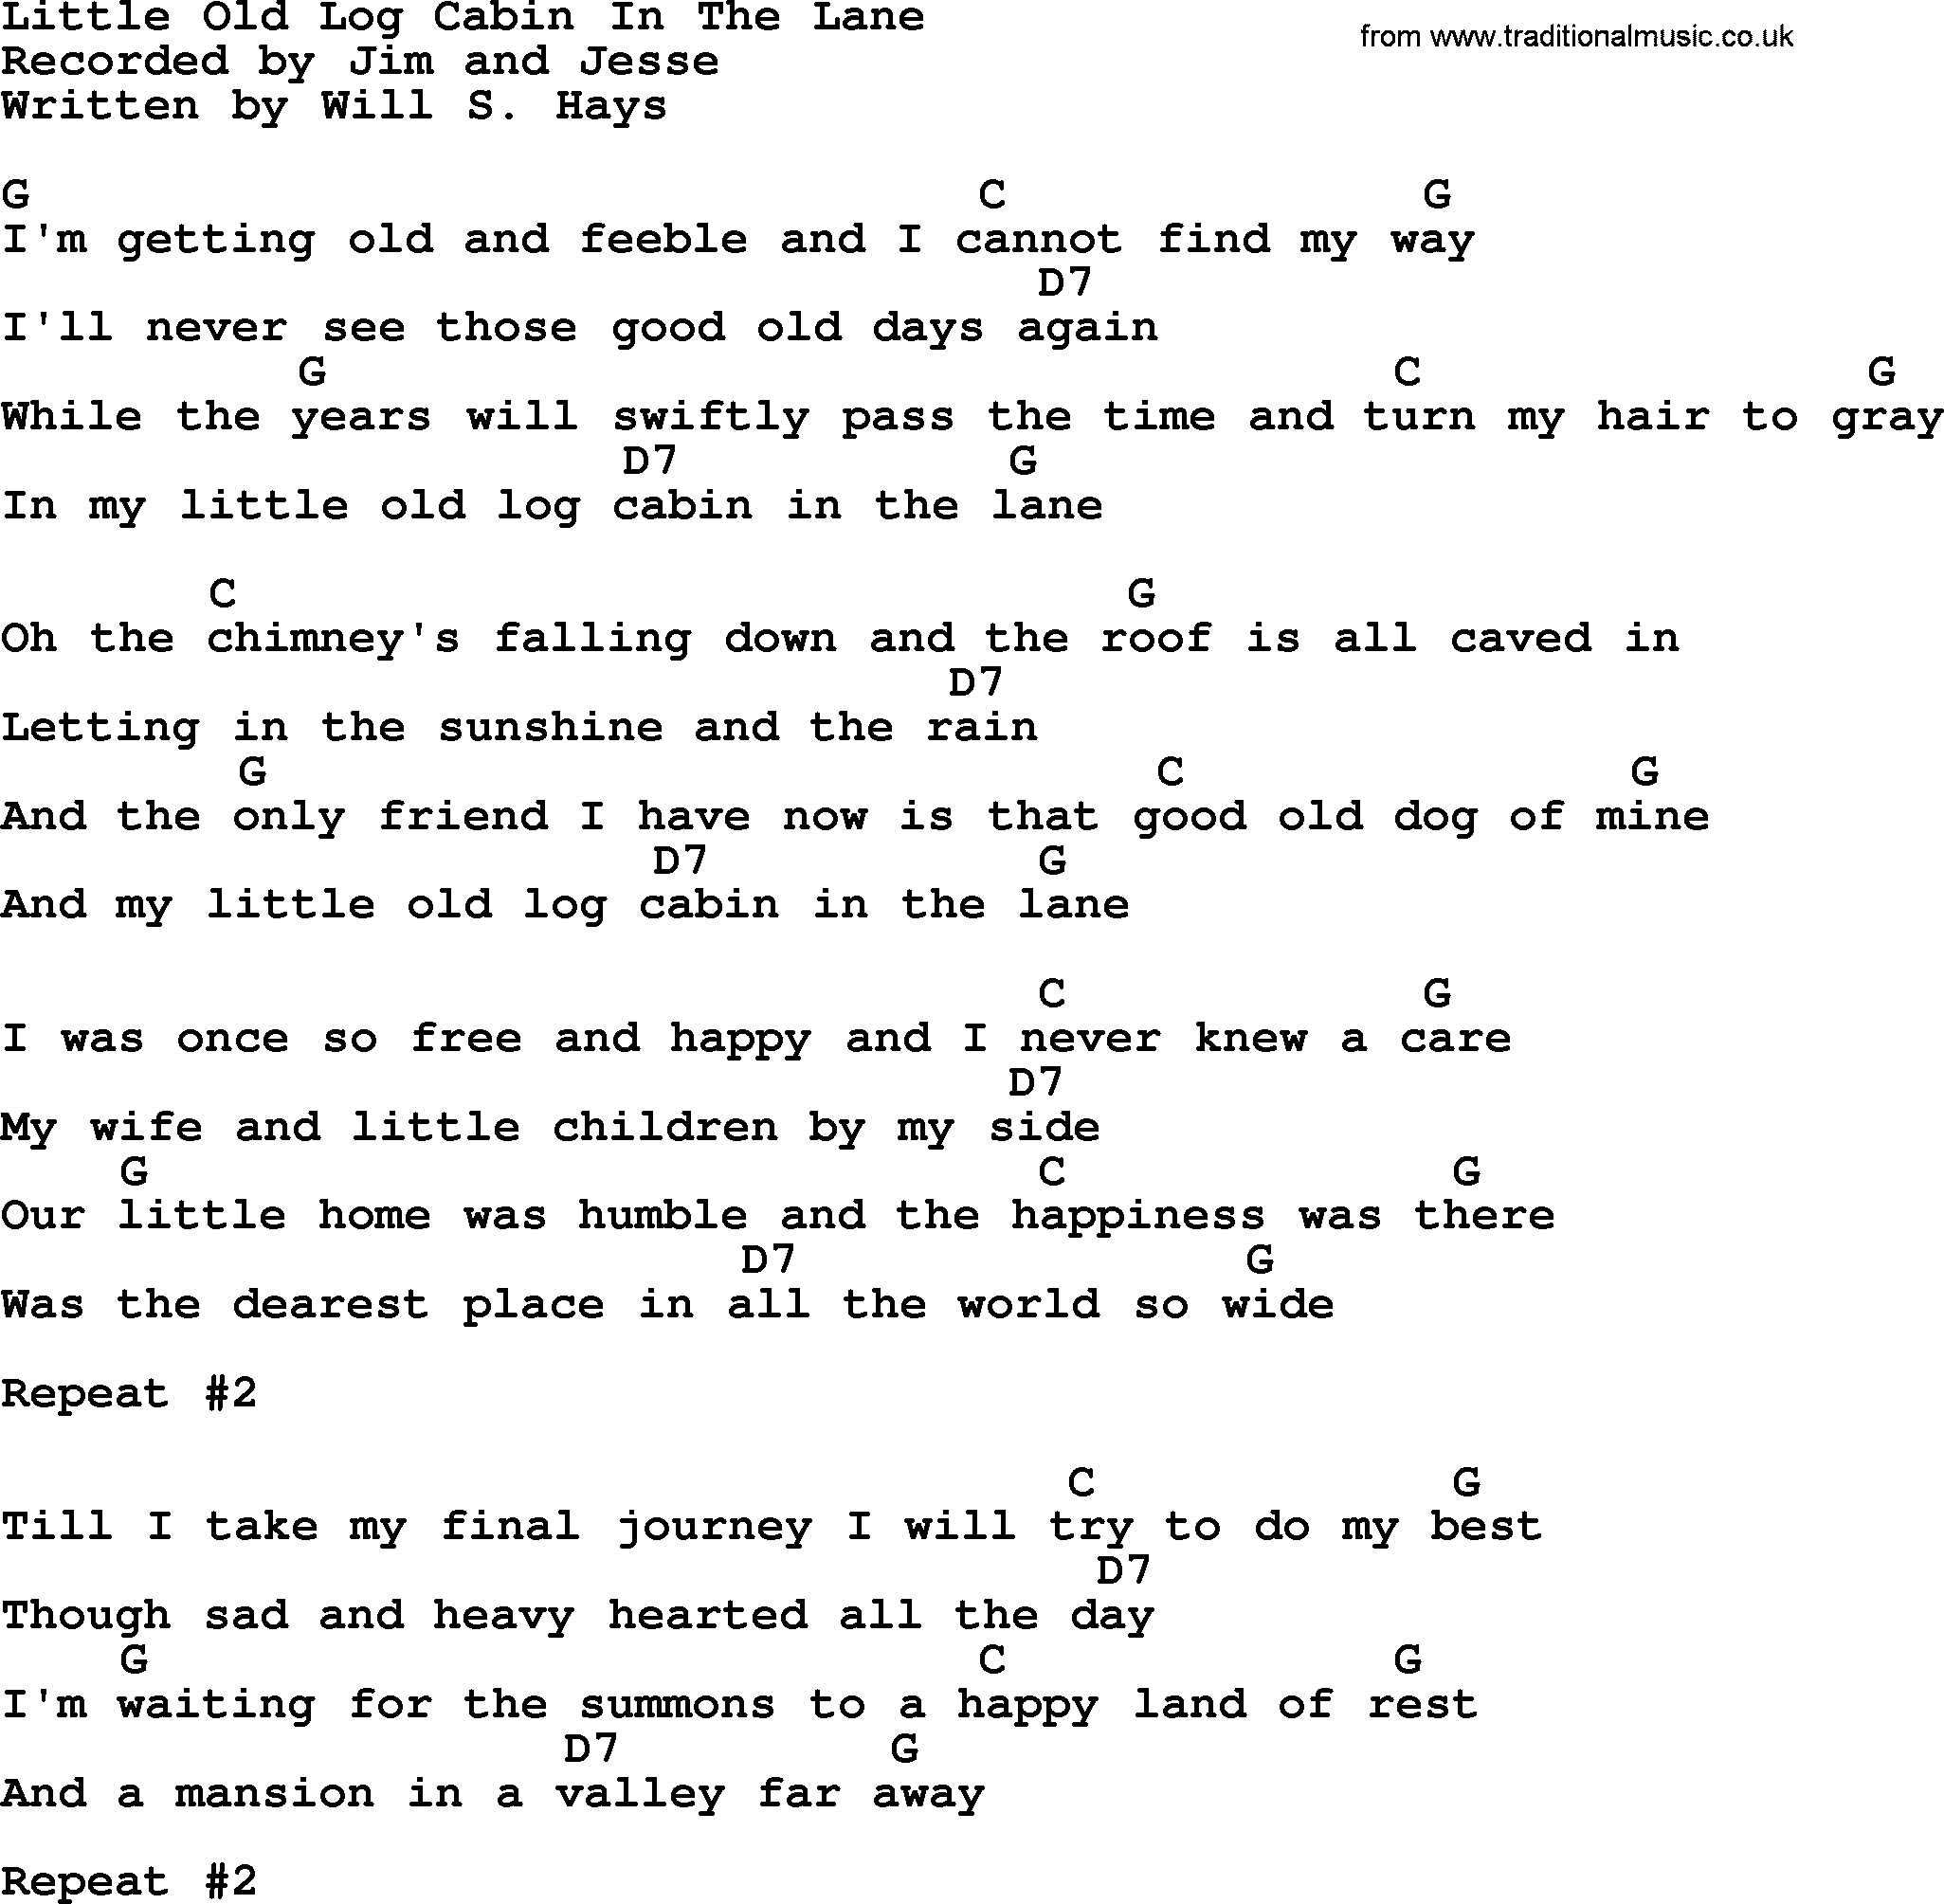 Bluegrass song: Little Old Log Cabin In The Lane, lyrics and chords